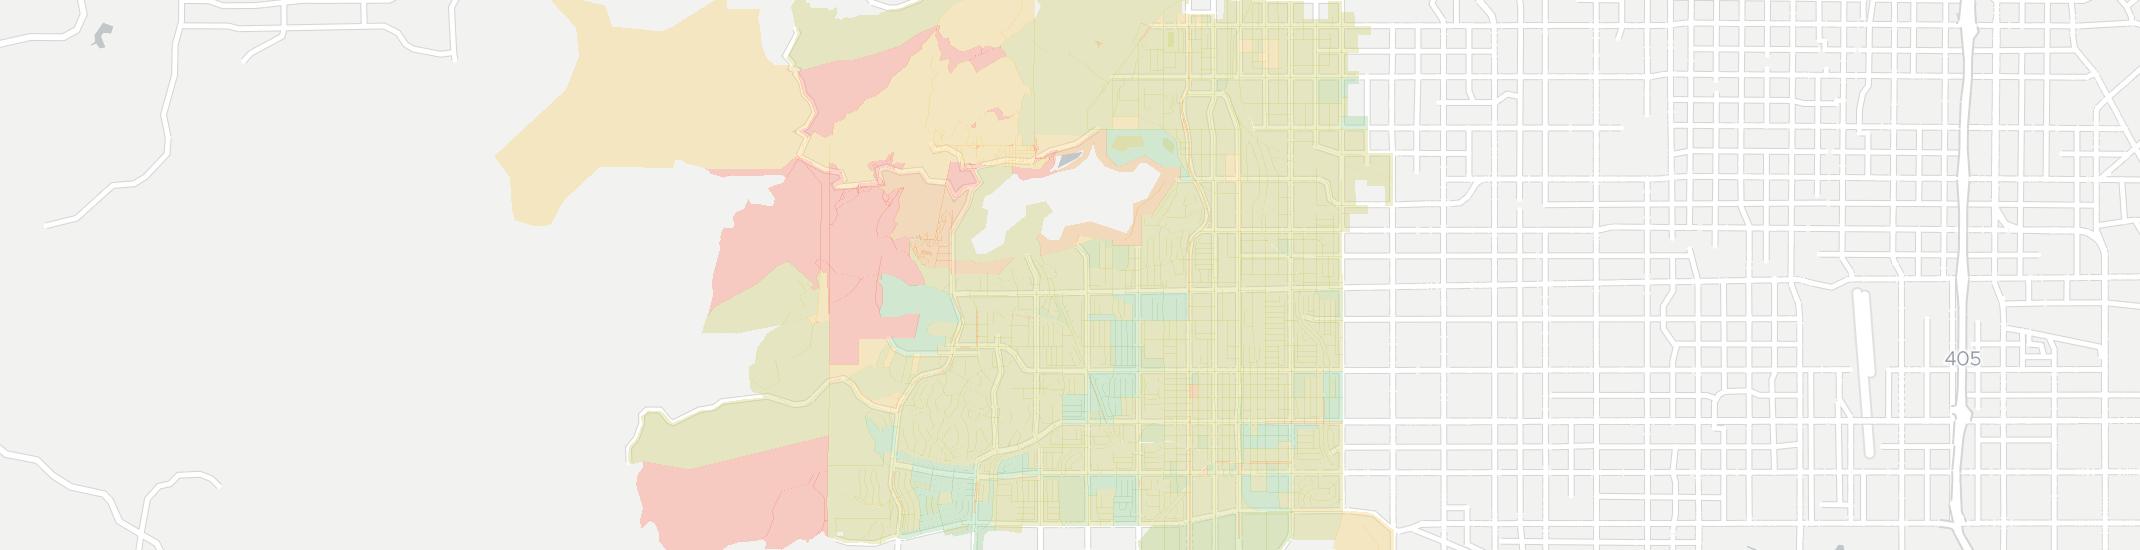 Canoga Park Internet Competition Map. Click for interactive map.